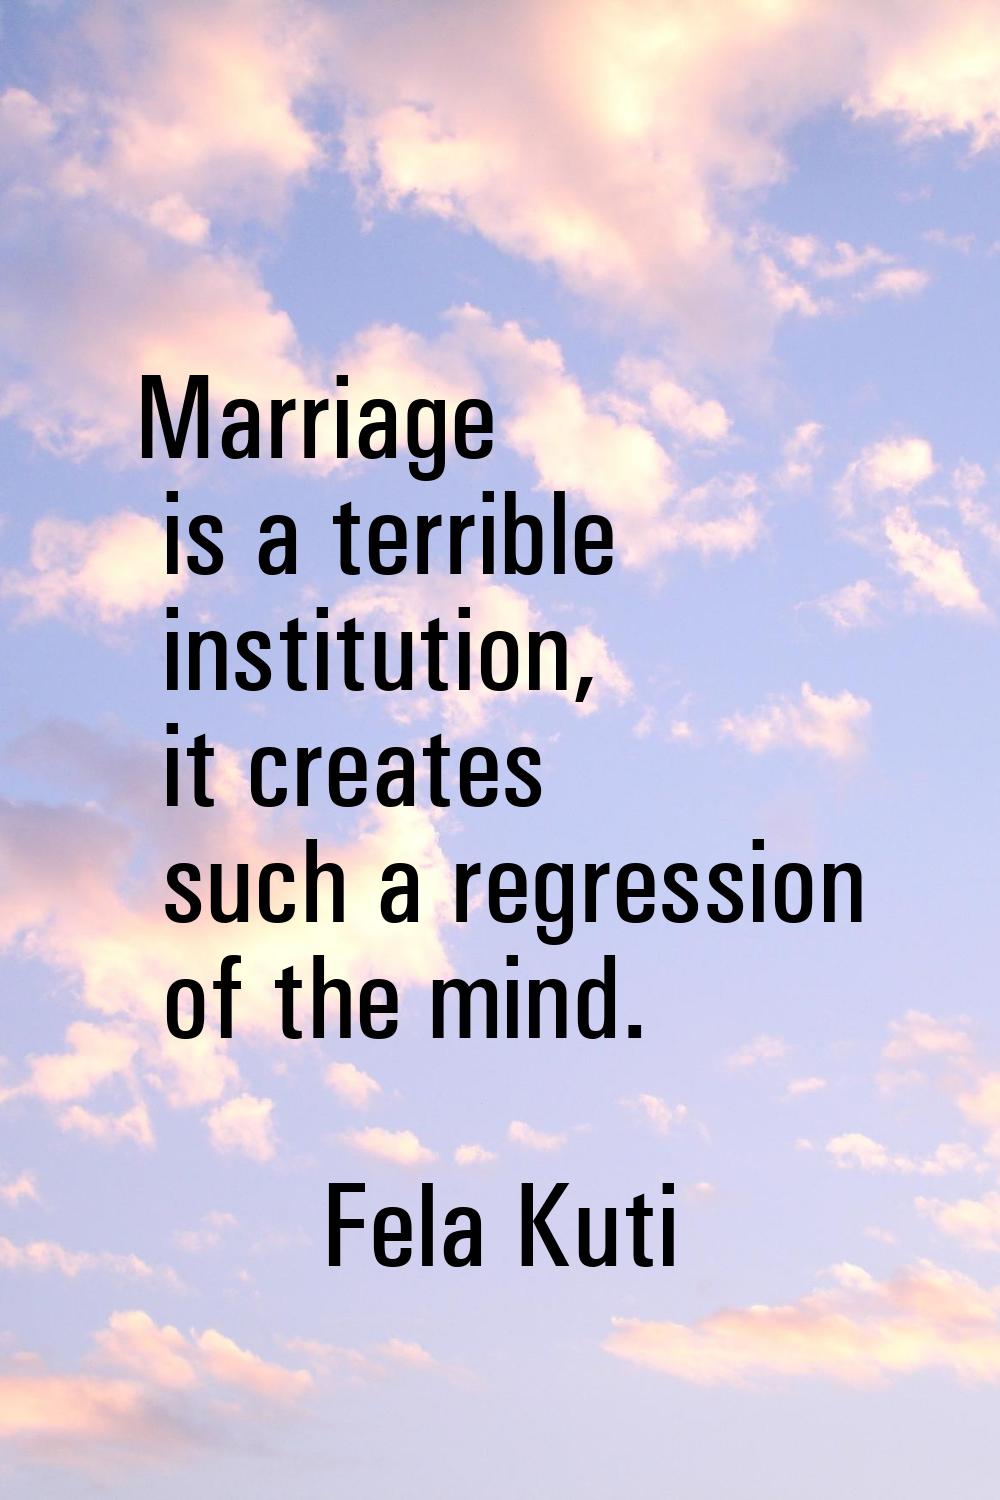 Marriage is a terrible institution, it creates such a regression of the mind.